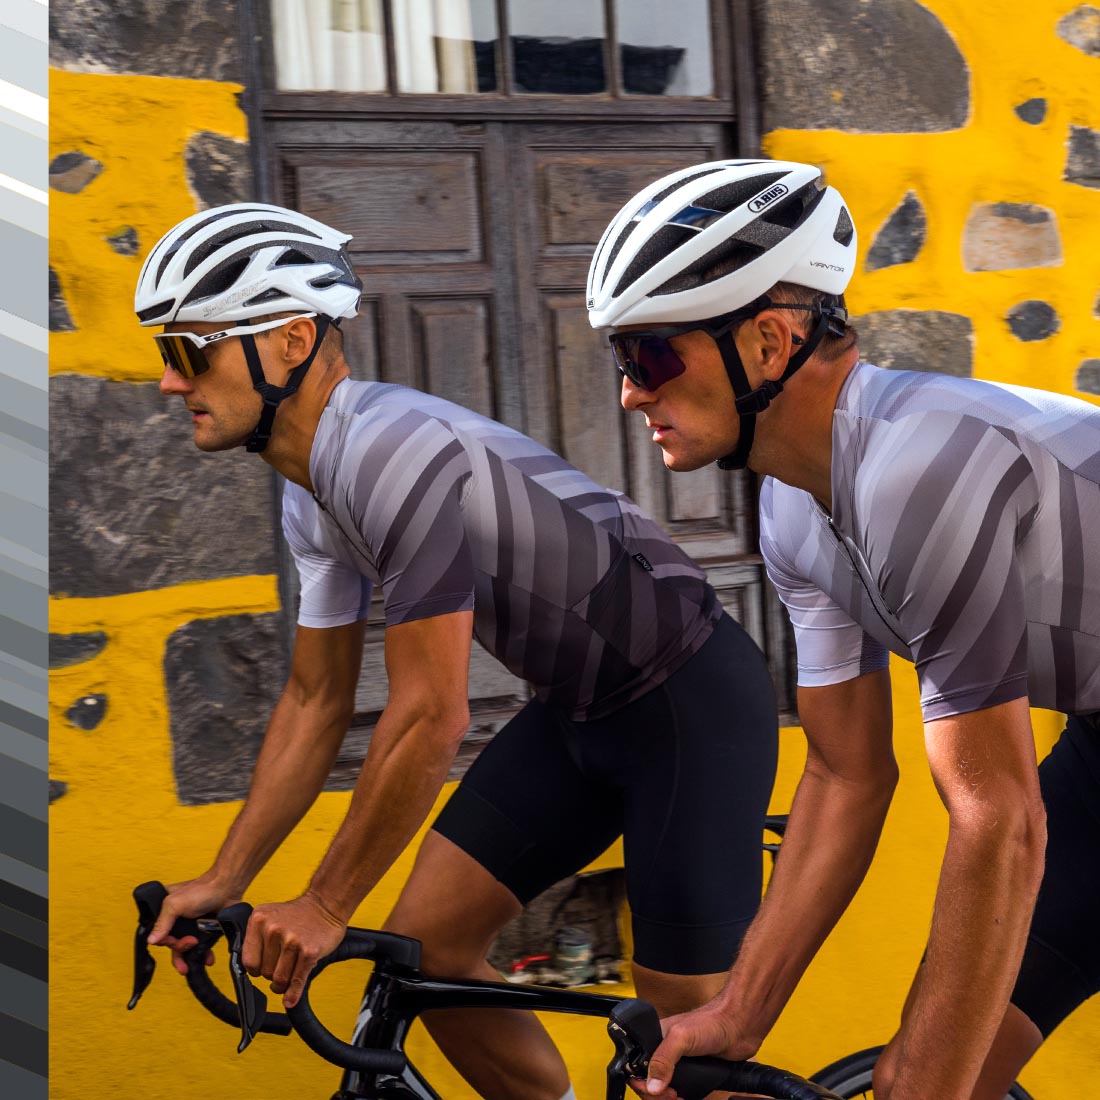 Luxa Magnetico gray jersey and bib shorts are form-fitting and made from lightweight, breathable materials